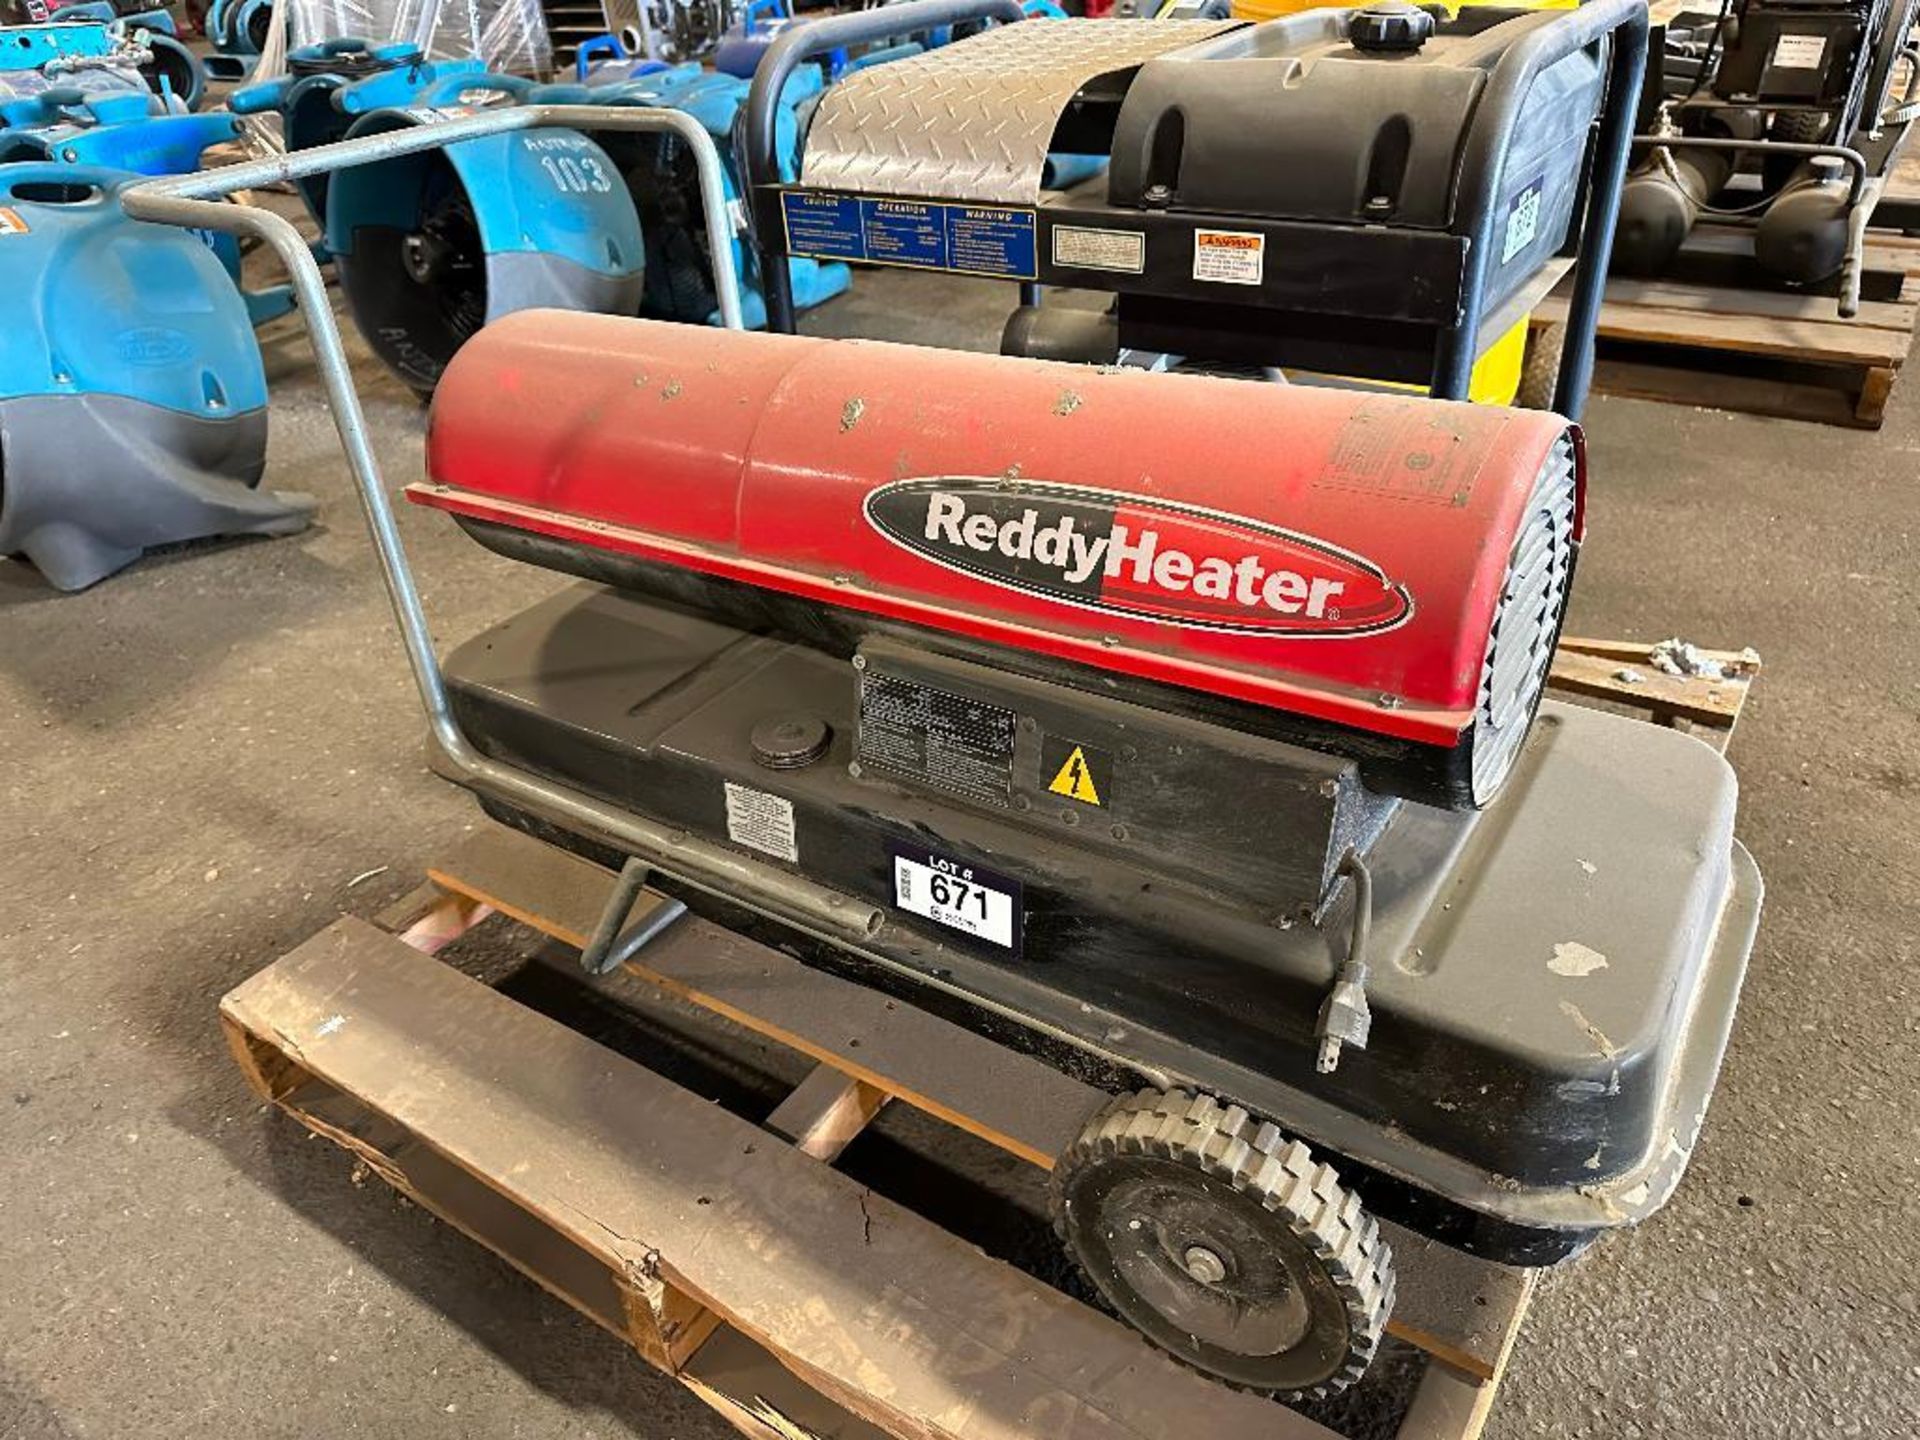 Reddy Heater RC165T Portable Gas Heater, 165,000 BTU - Image 2 of 4